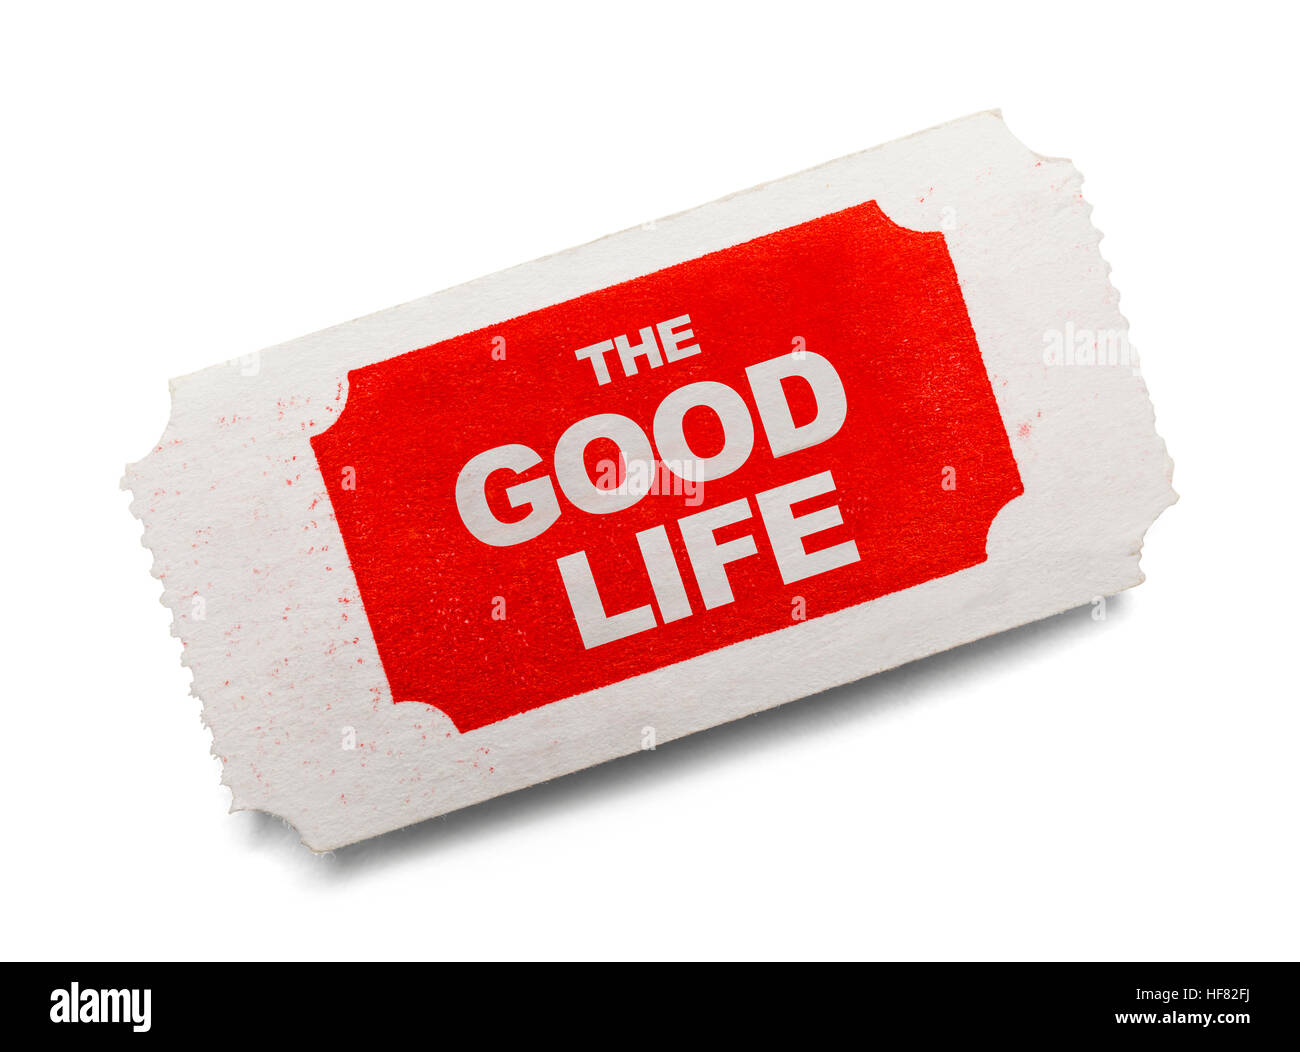 Single Ticket to the Good Life Isolated on White Background. Stock Photo